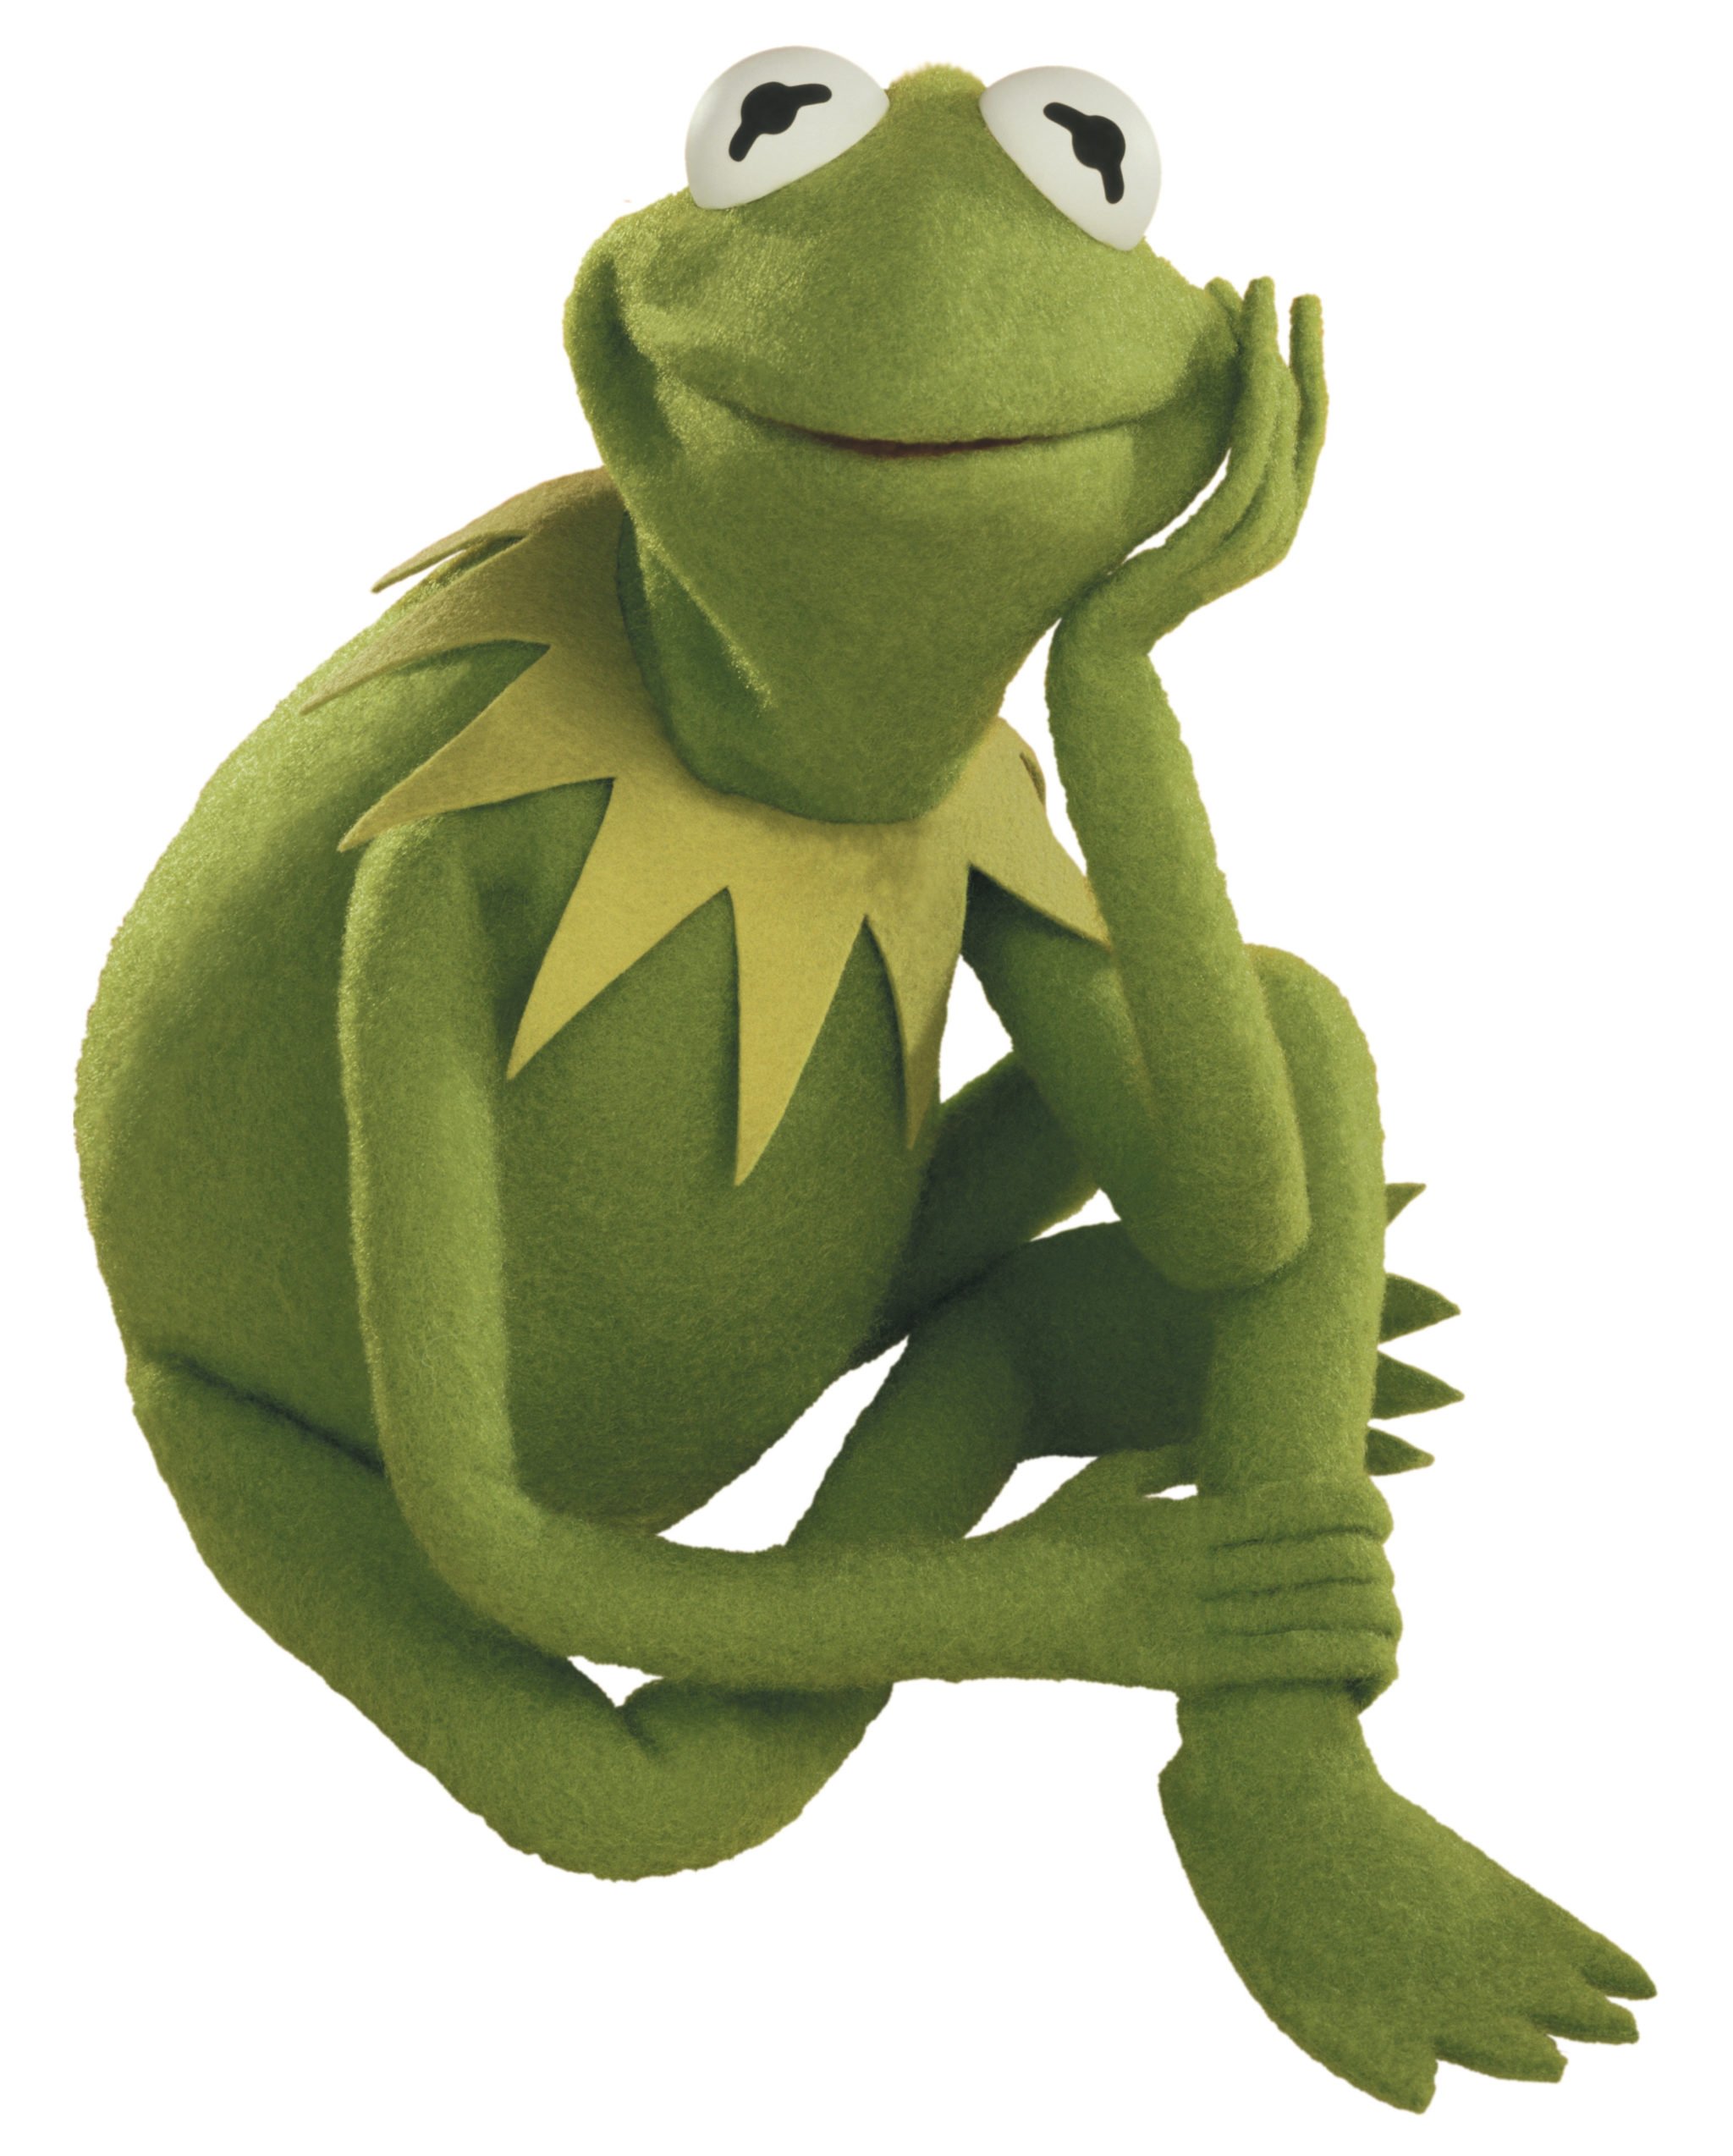 DC Native Kermit the Frog Added to the National Recording Registry